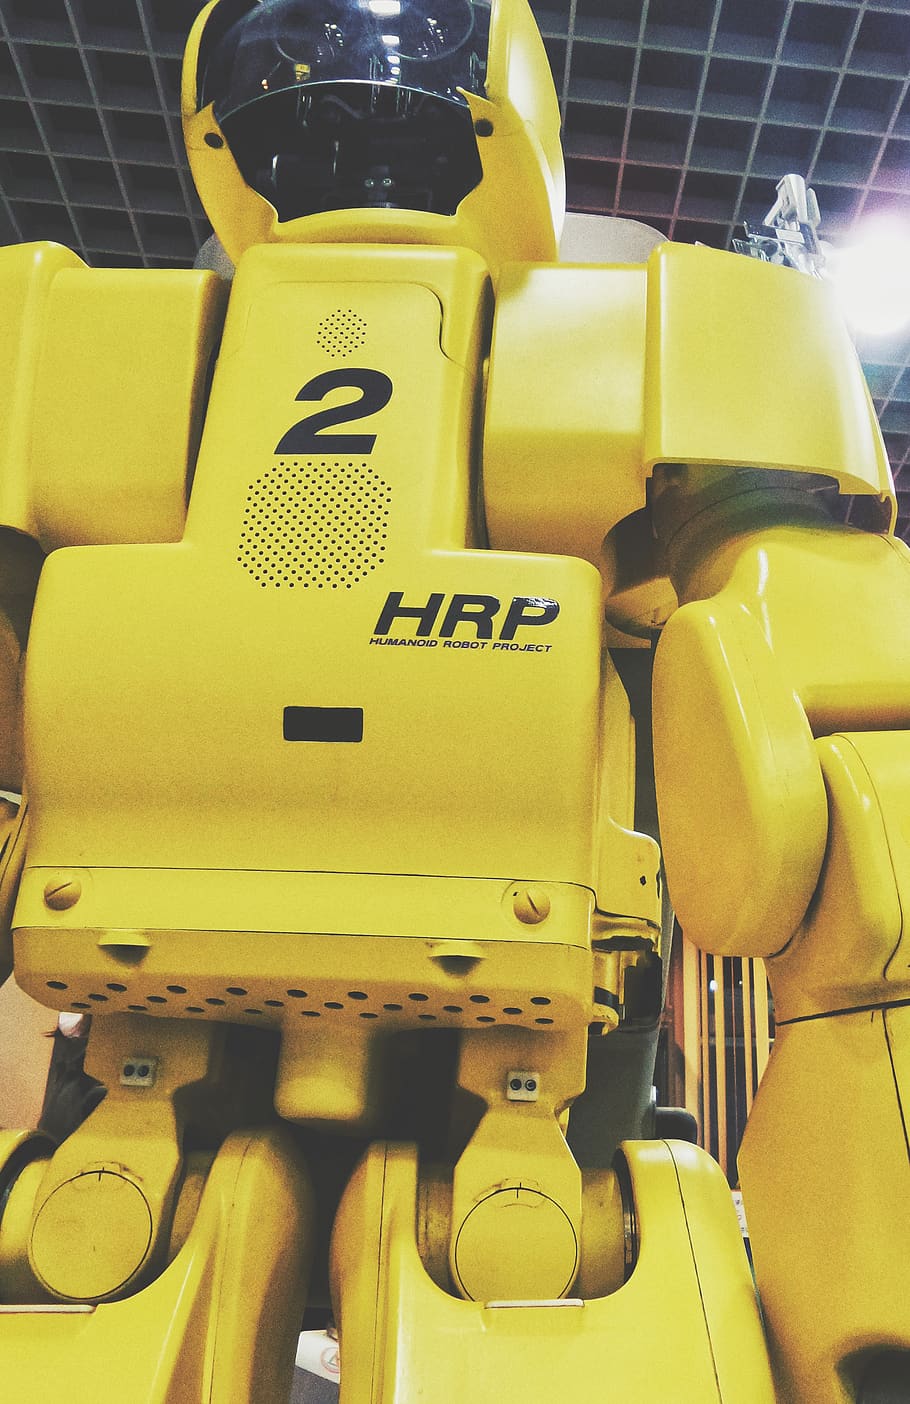 robot, android, hrp, humanoid, cyber, future, bionic, yellow, HD wallpaper